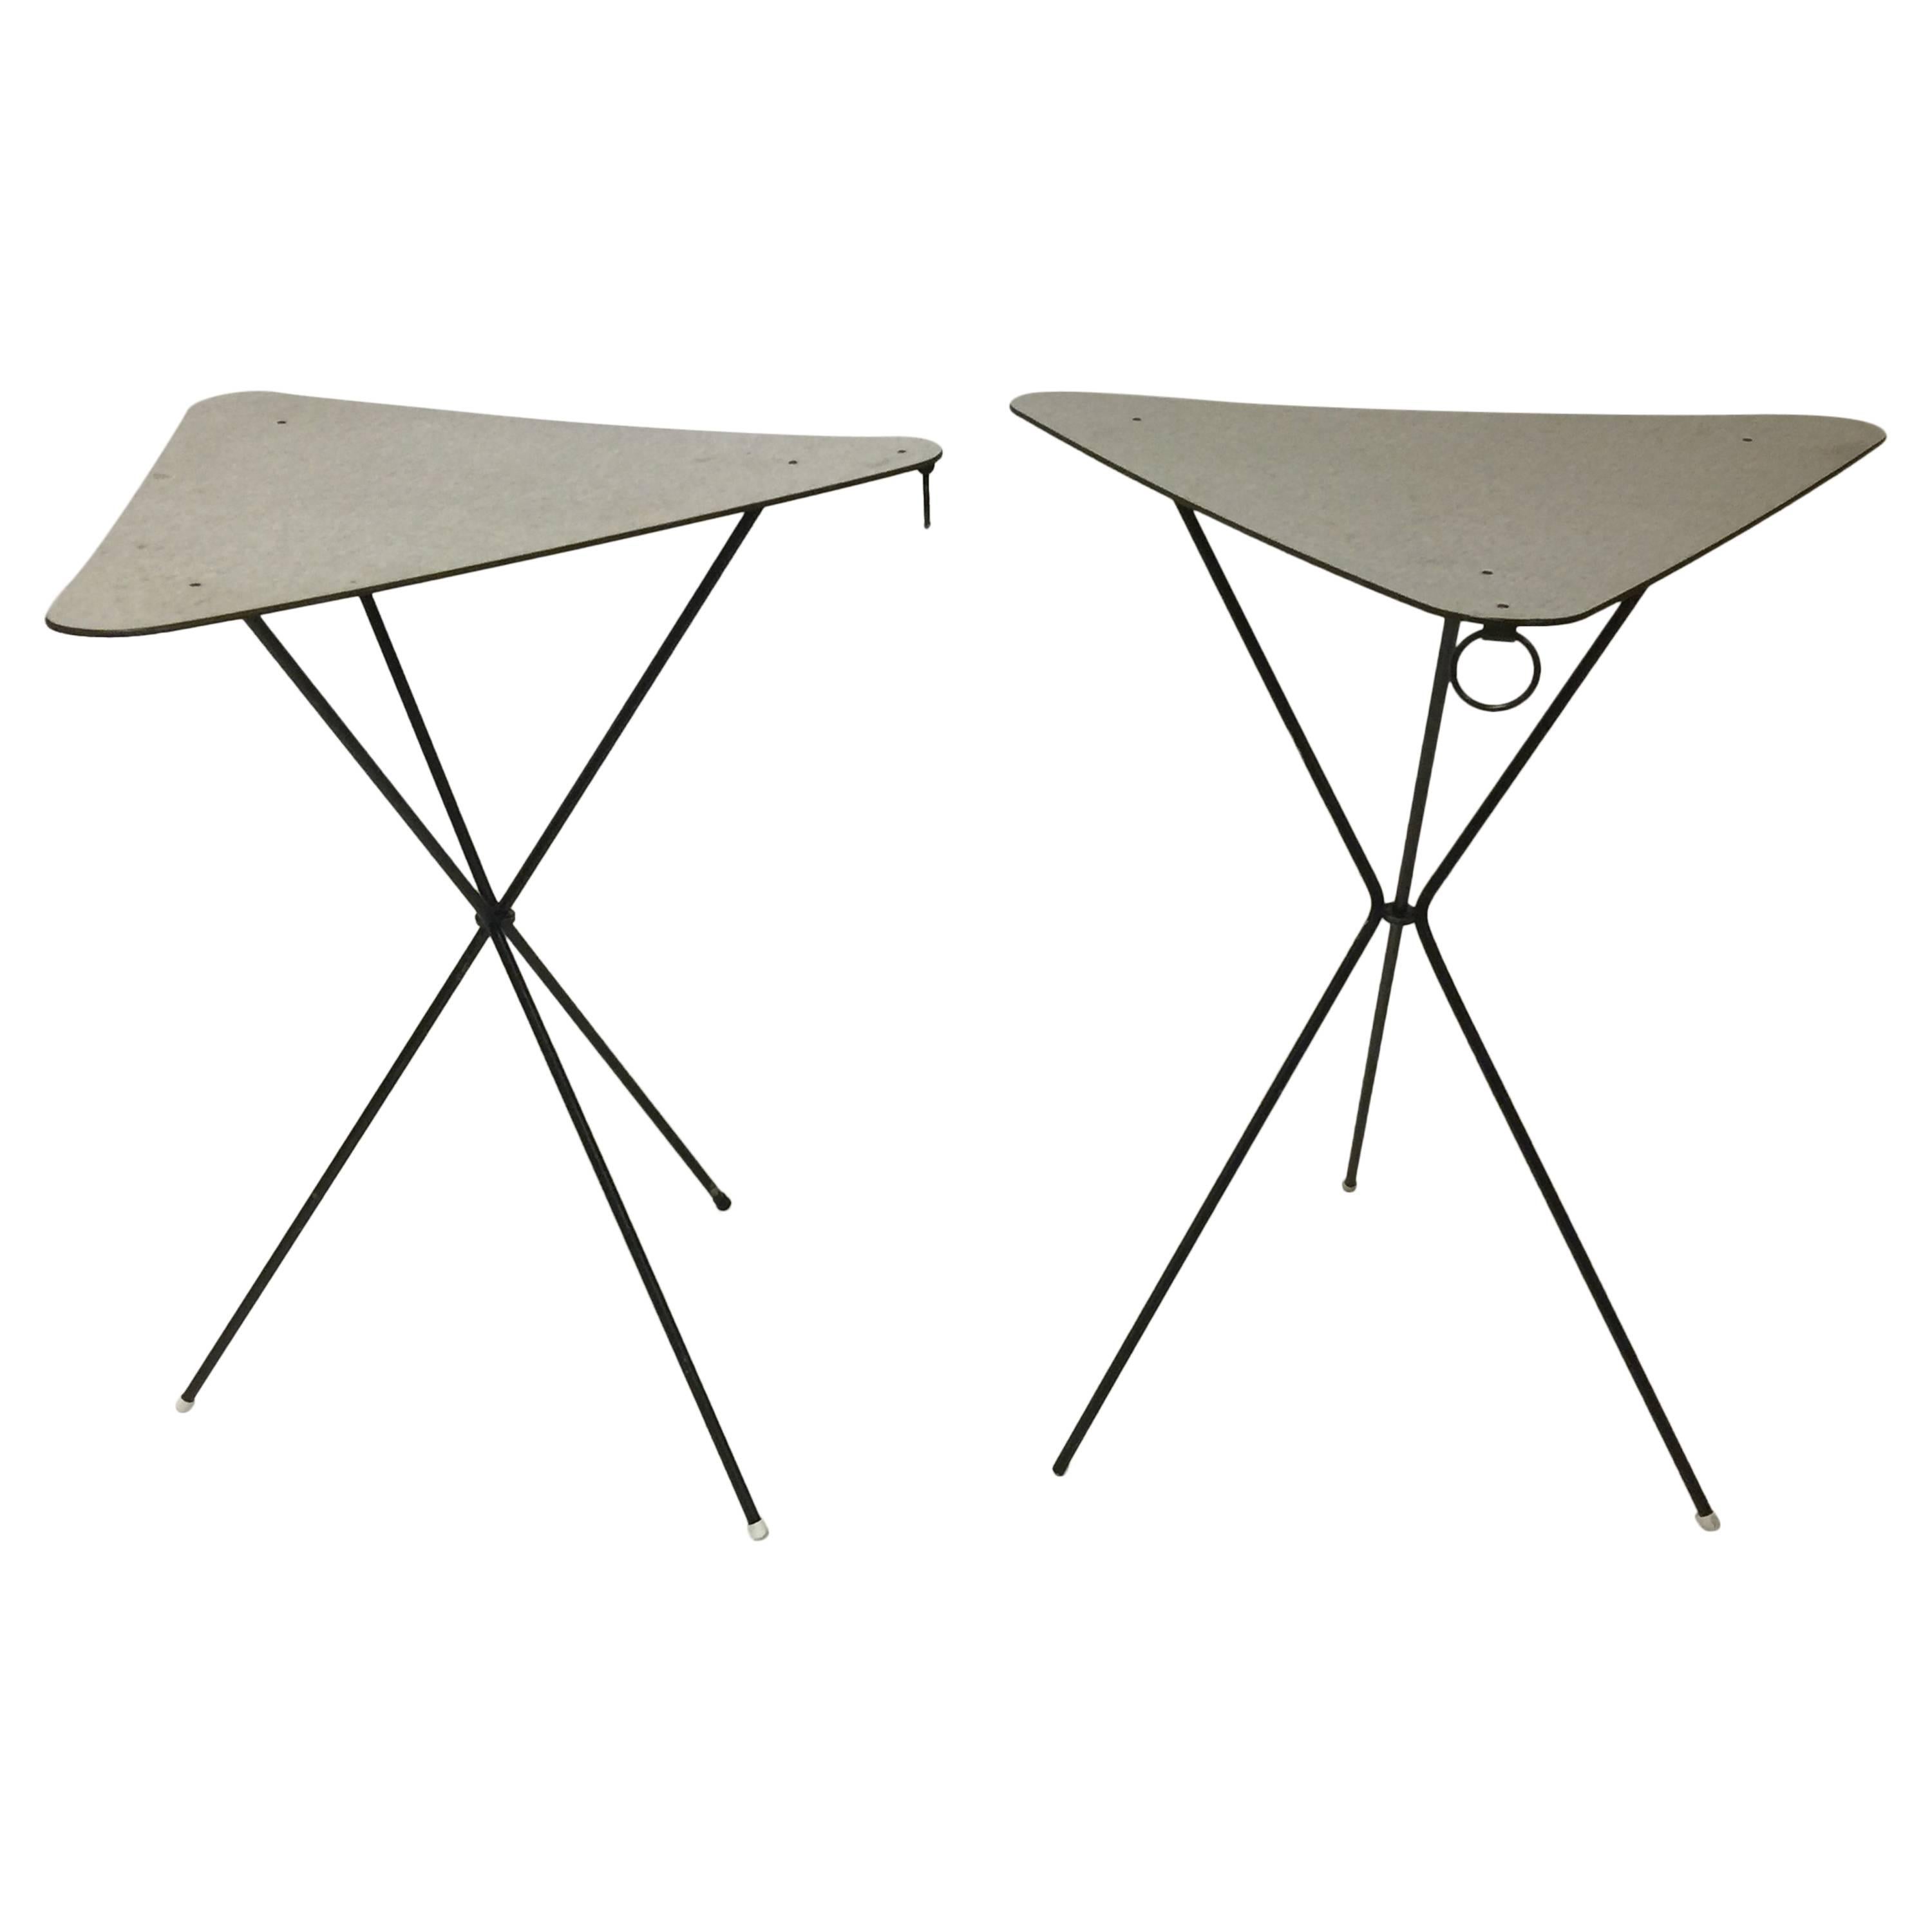 Pair of French Triangular Cocktail Tables by Mathieu Matégot, circa 1950s For Sale